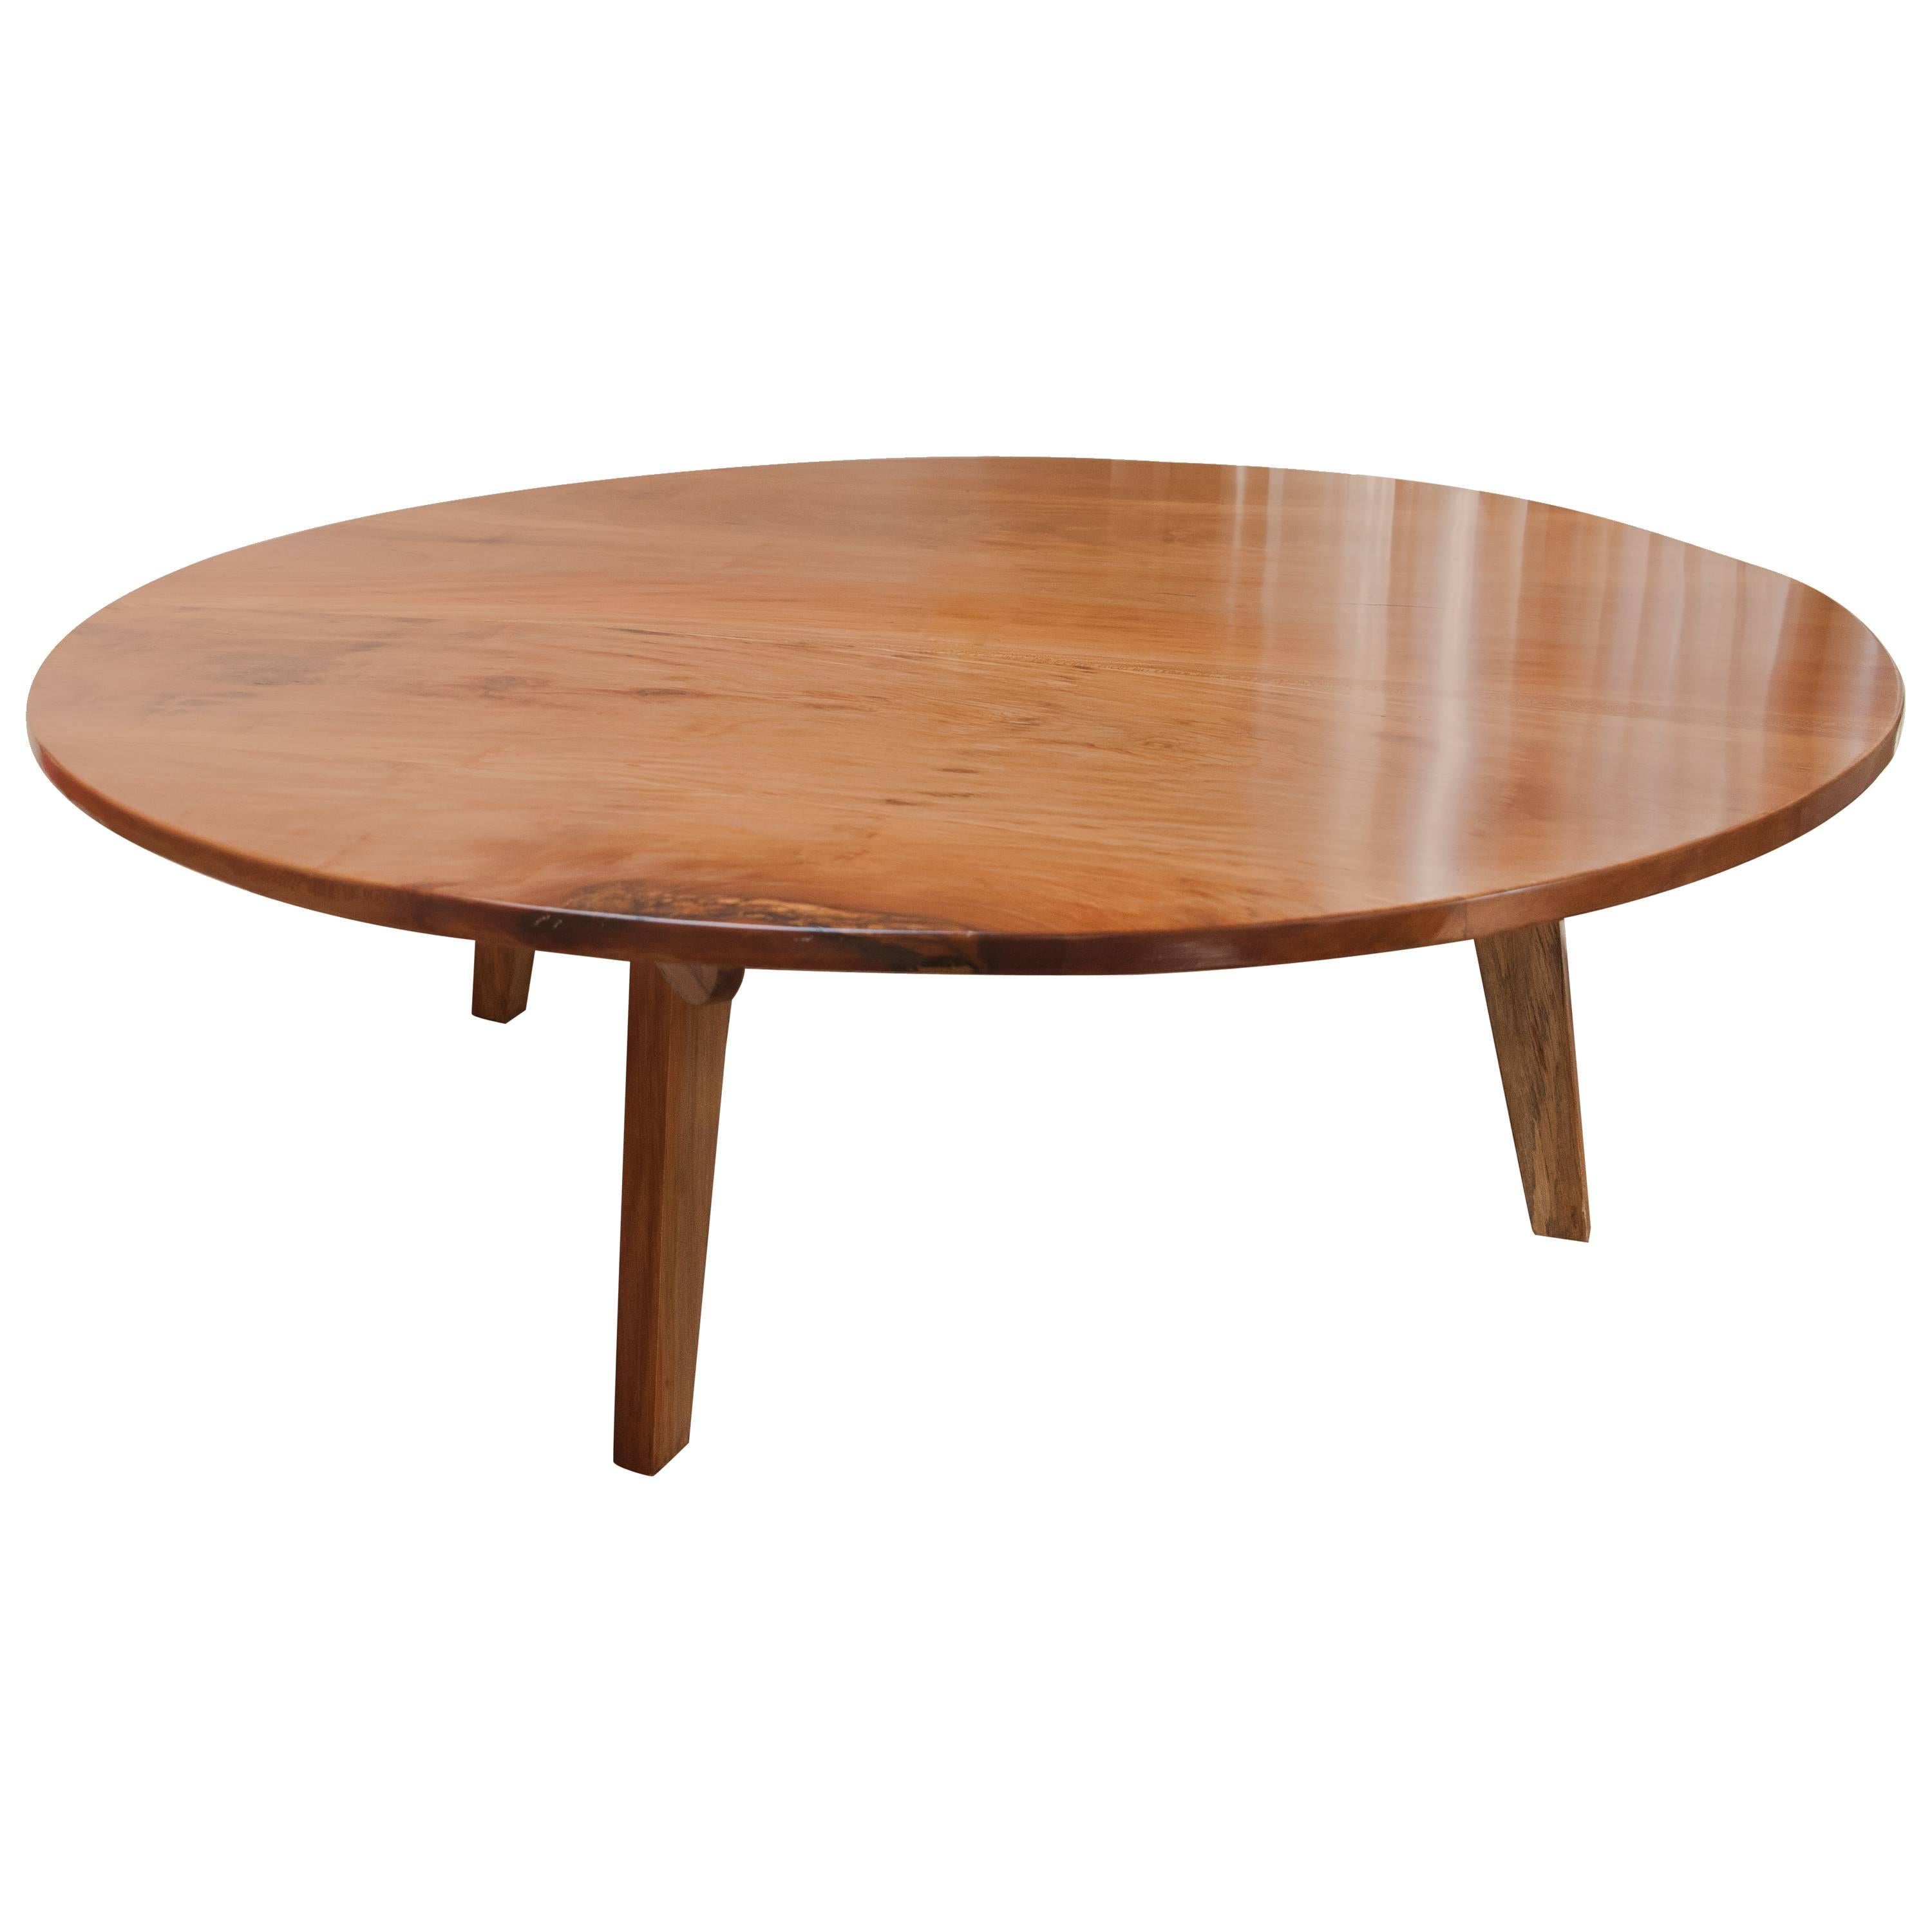 Customized Plane Wood Circular Table For Sale